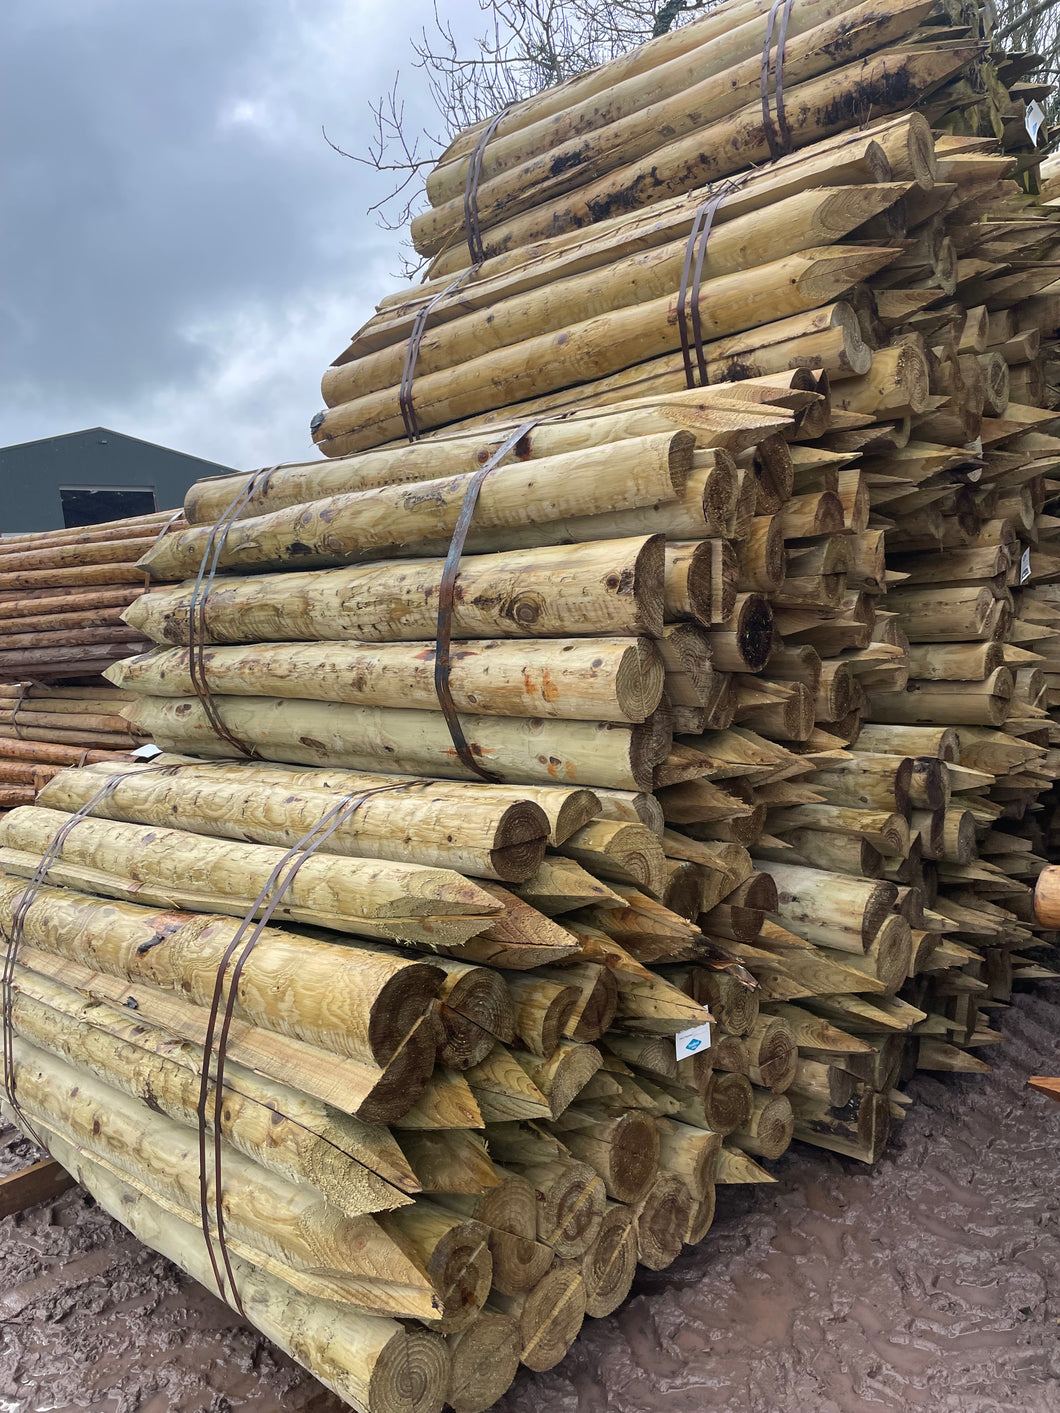 Split Posts from Leam Agri Ltd, Tempo, County Fermanagh, Northern Ireland. Serving Fermanagh, Tyrone, Antrim, Down, Londonderry, Armagh, Cavan, Leitrim, Sligo, Monaghan, Donegal, Dublin Carlow, Clare, Cork, Galway, Kerry, Kildare, Kilkenny, Laois, Limerick, Longford, Louth, Mayo, Meath, Monaghan, Offaly, Roscommon, Tipperary, Waterford, Westmeath, Wexford and Wicklow and throughout the United Kingdom